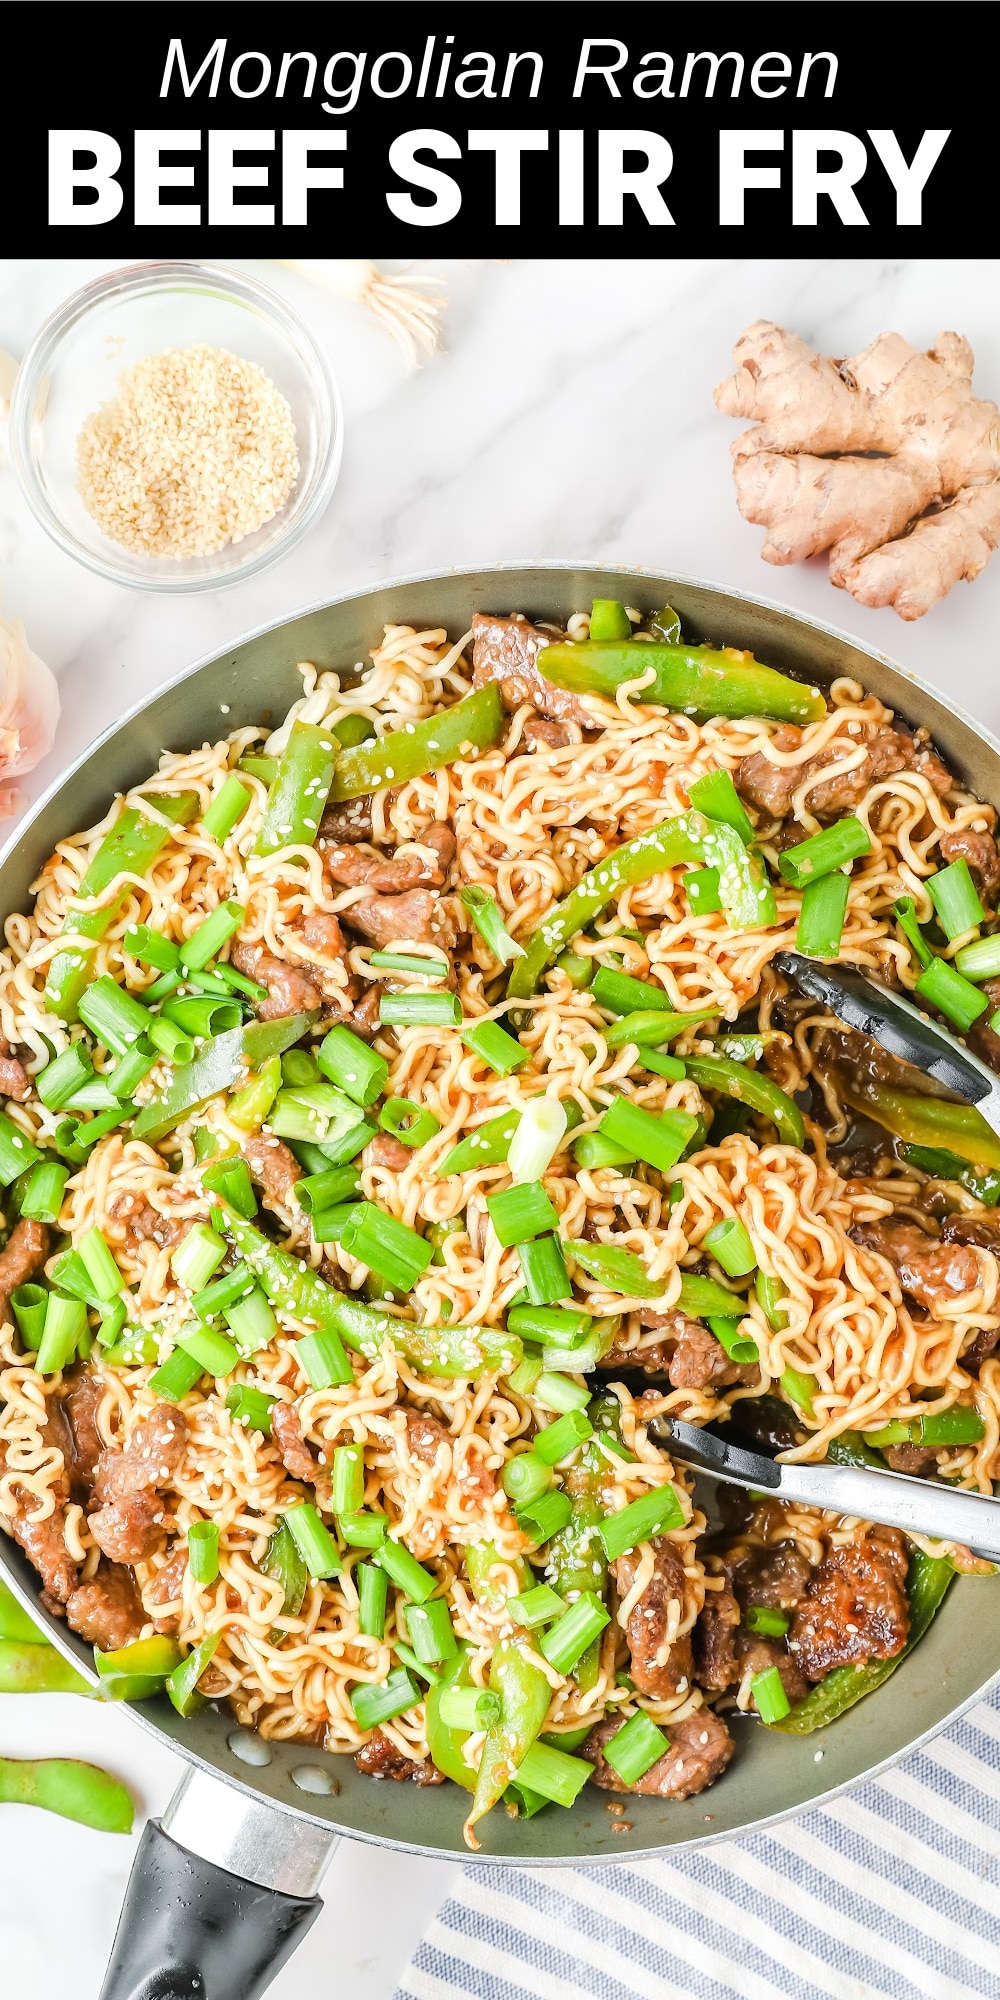 This Mongolian Ramen Beef Stir Fry is a quick and ridiculously delicious complete meal in one. Loaded with amazing Asian flavors, tender strips of beef and veggies are coated in a sweet and savory stir fry sauce and tossed with tender noodles. 